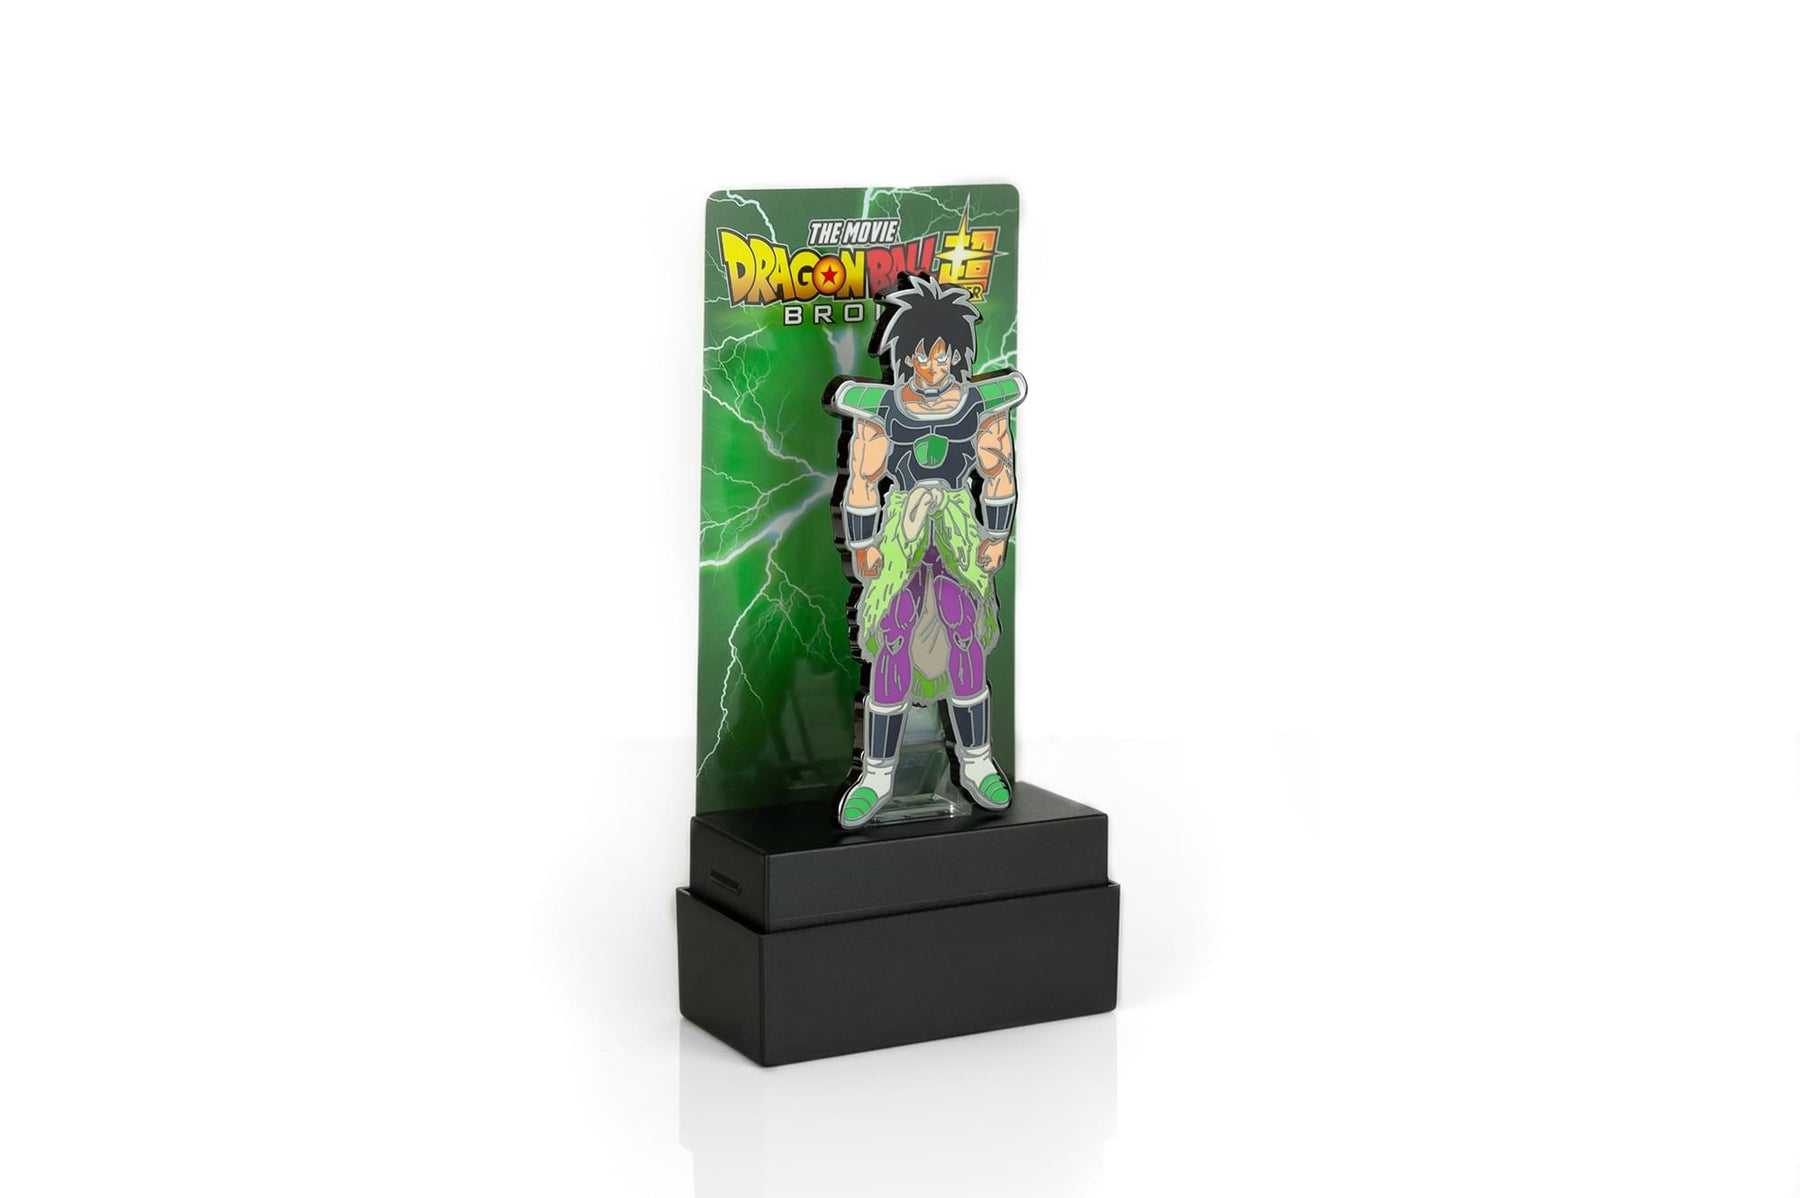 Dragon Ball Super 3-Inch Collectible Enamel FiGPiN - Broly #217 Toynk Exclusive